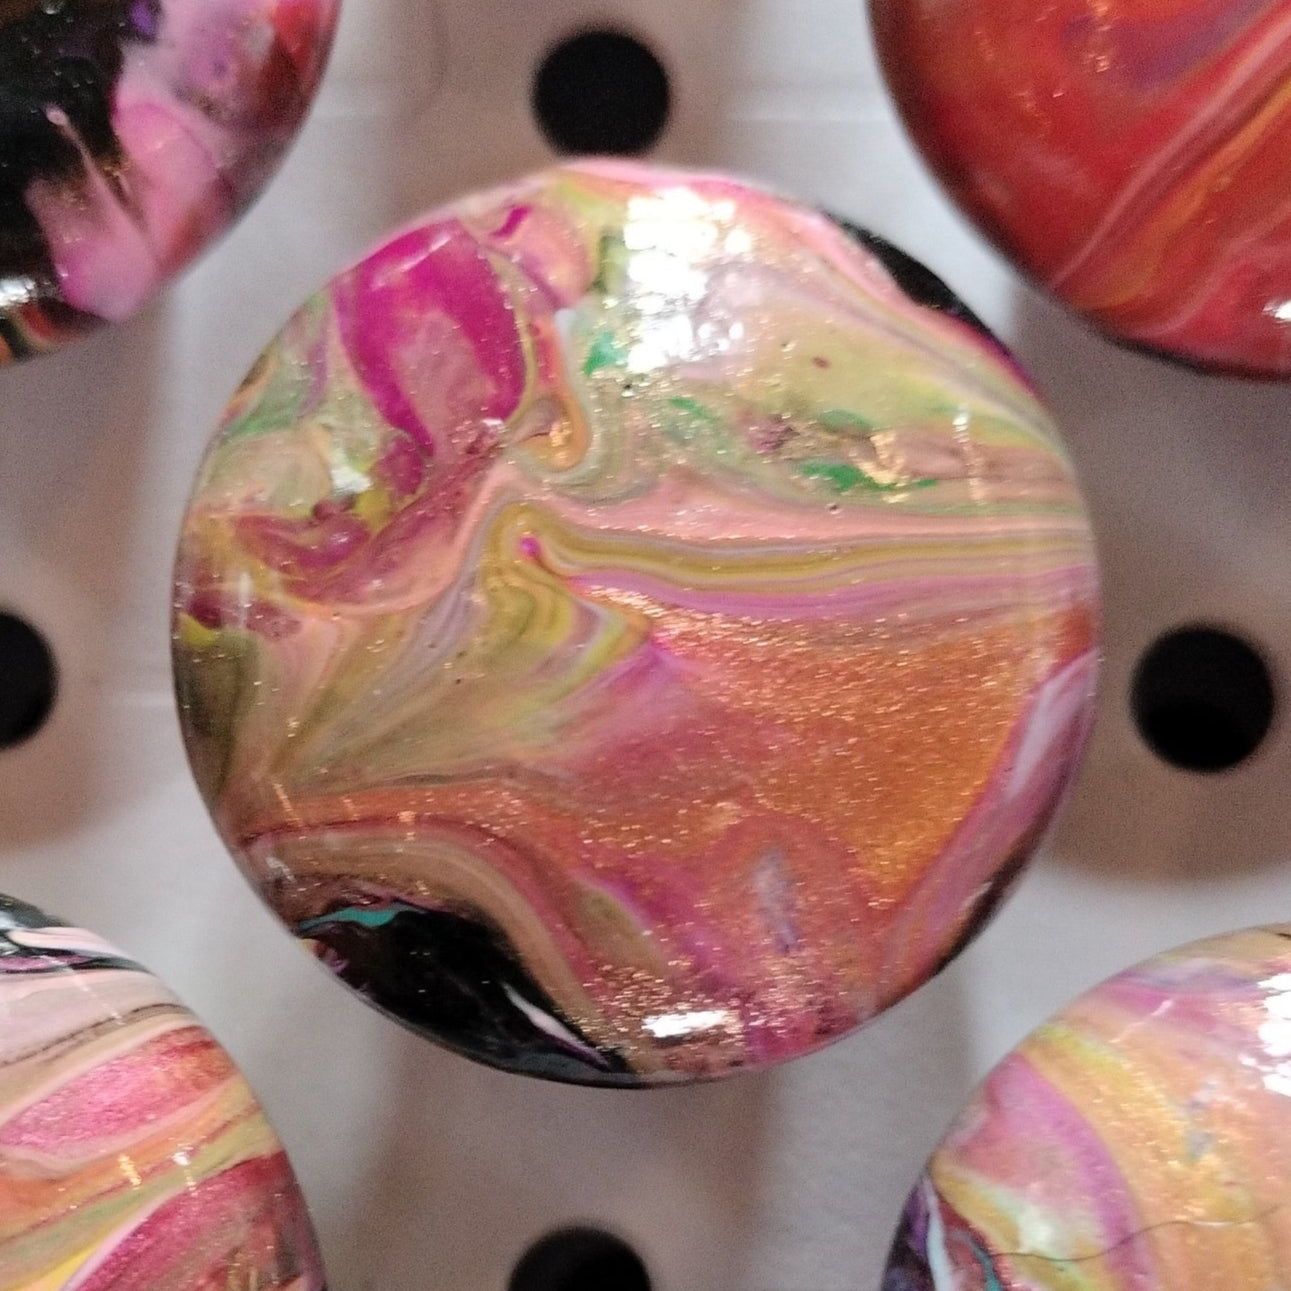 Fluid Art Drawer Knobs  from Karma Goodness Designs